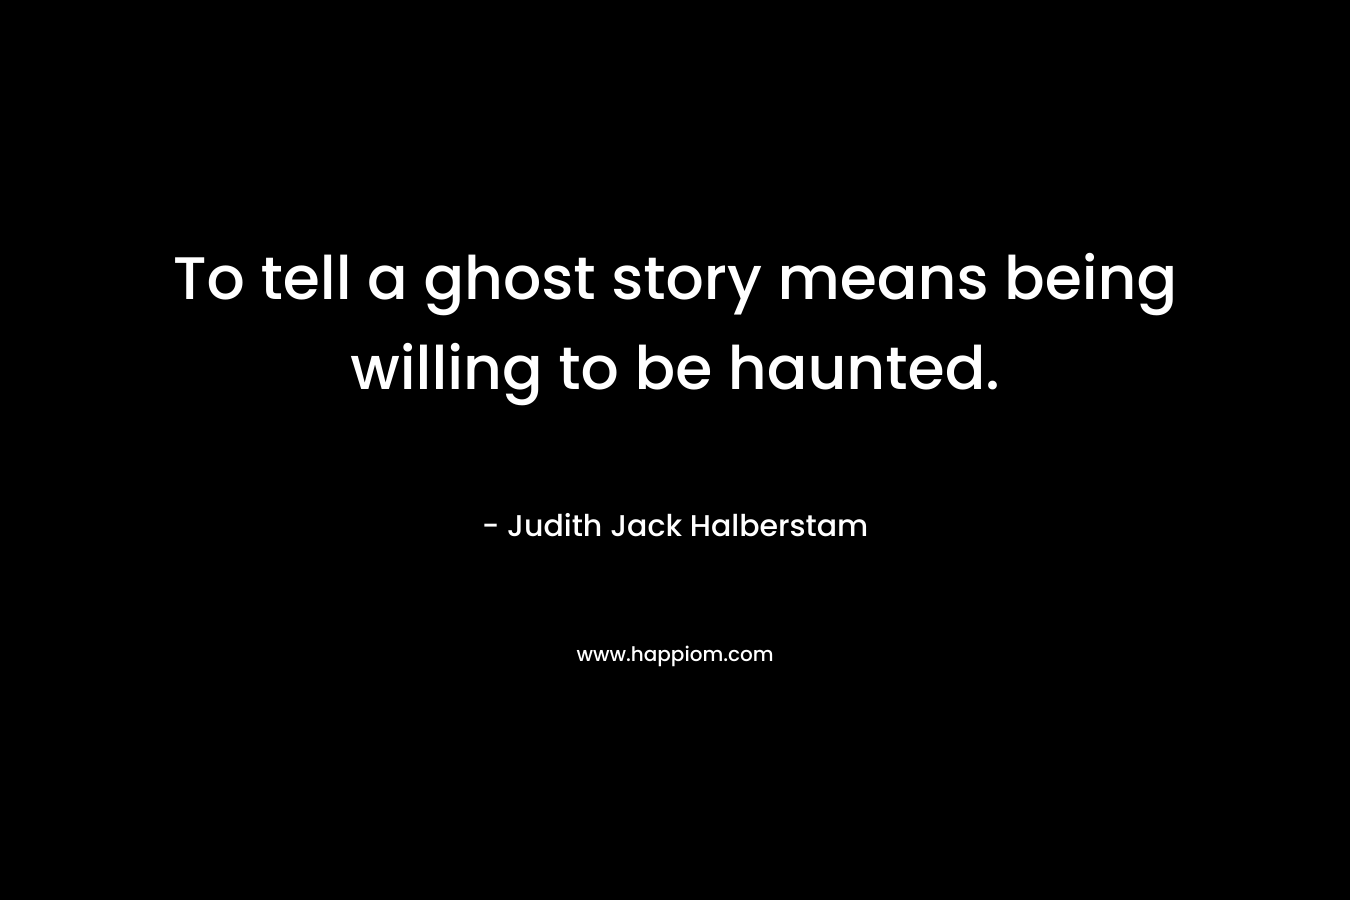 To tell a ghost story means being willing to be haunted.